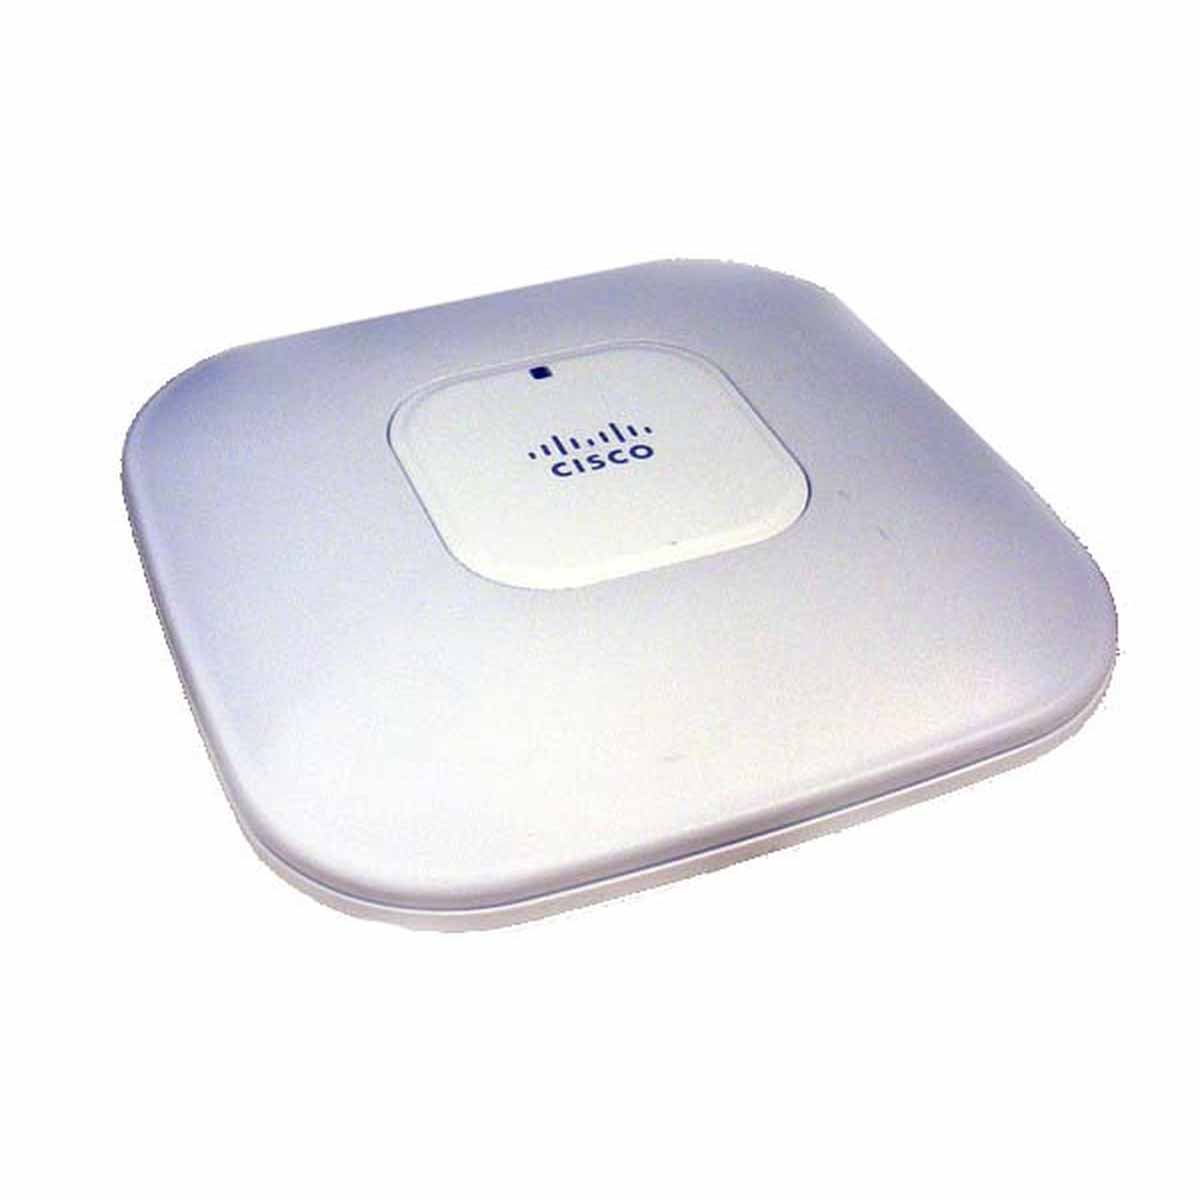 Save on Cisco Wireless Access Points from your trusted partners at Flagship Technologies. Browse our revolving inventory of network equipment online and get the best deals to maintain or upgrade your IT project or data center.